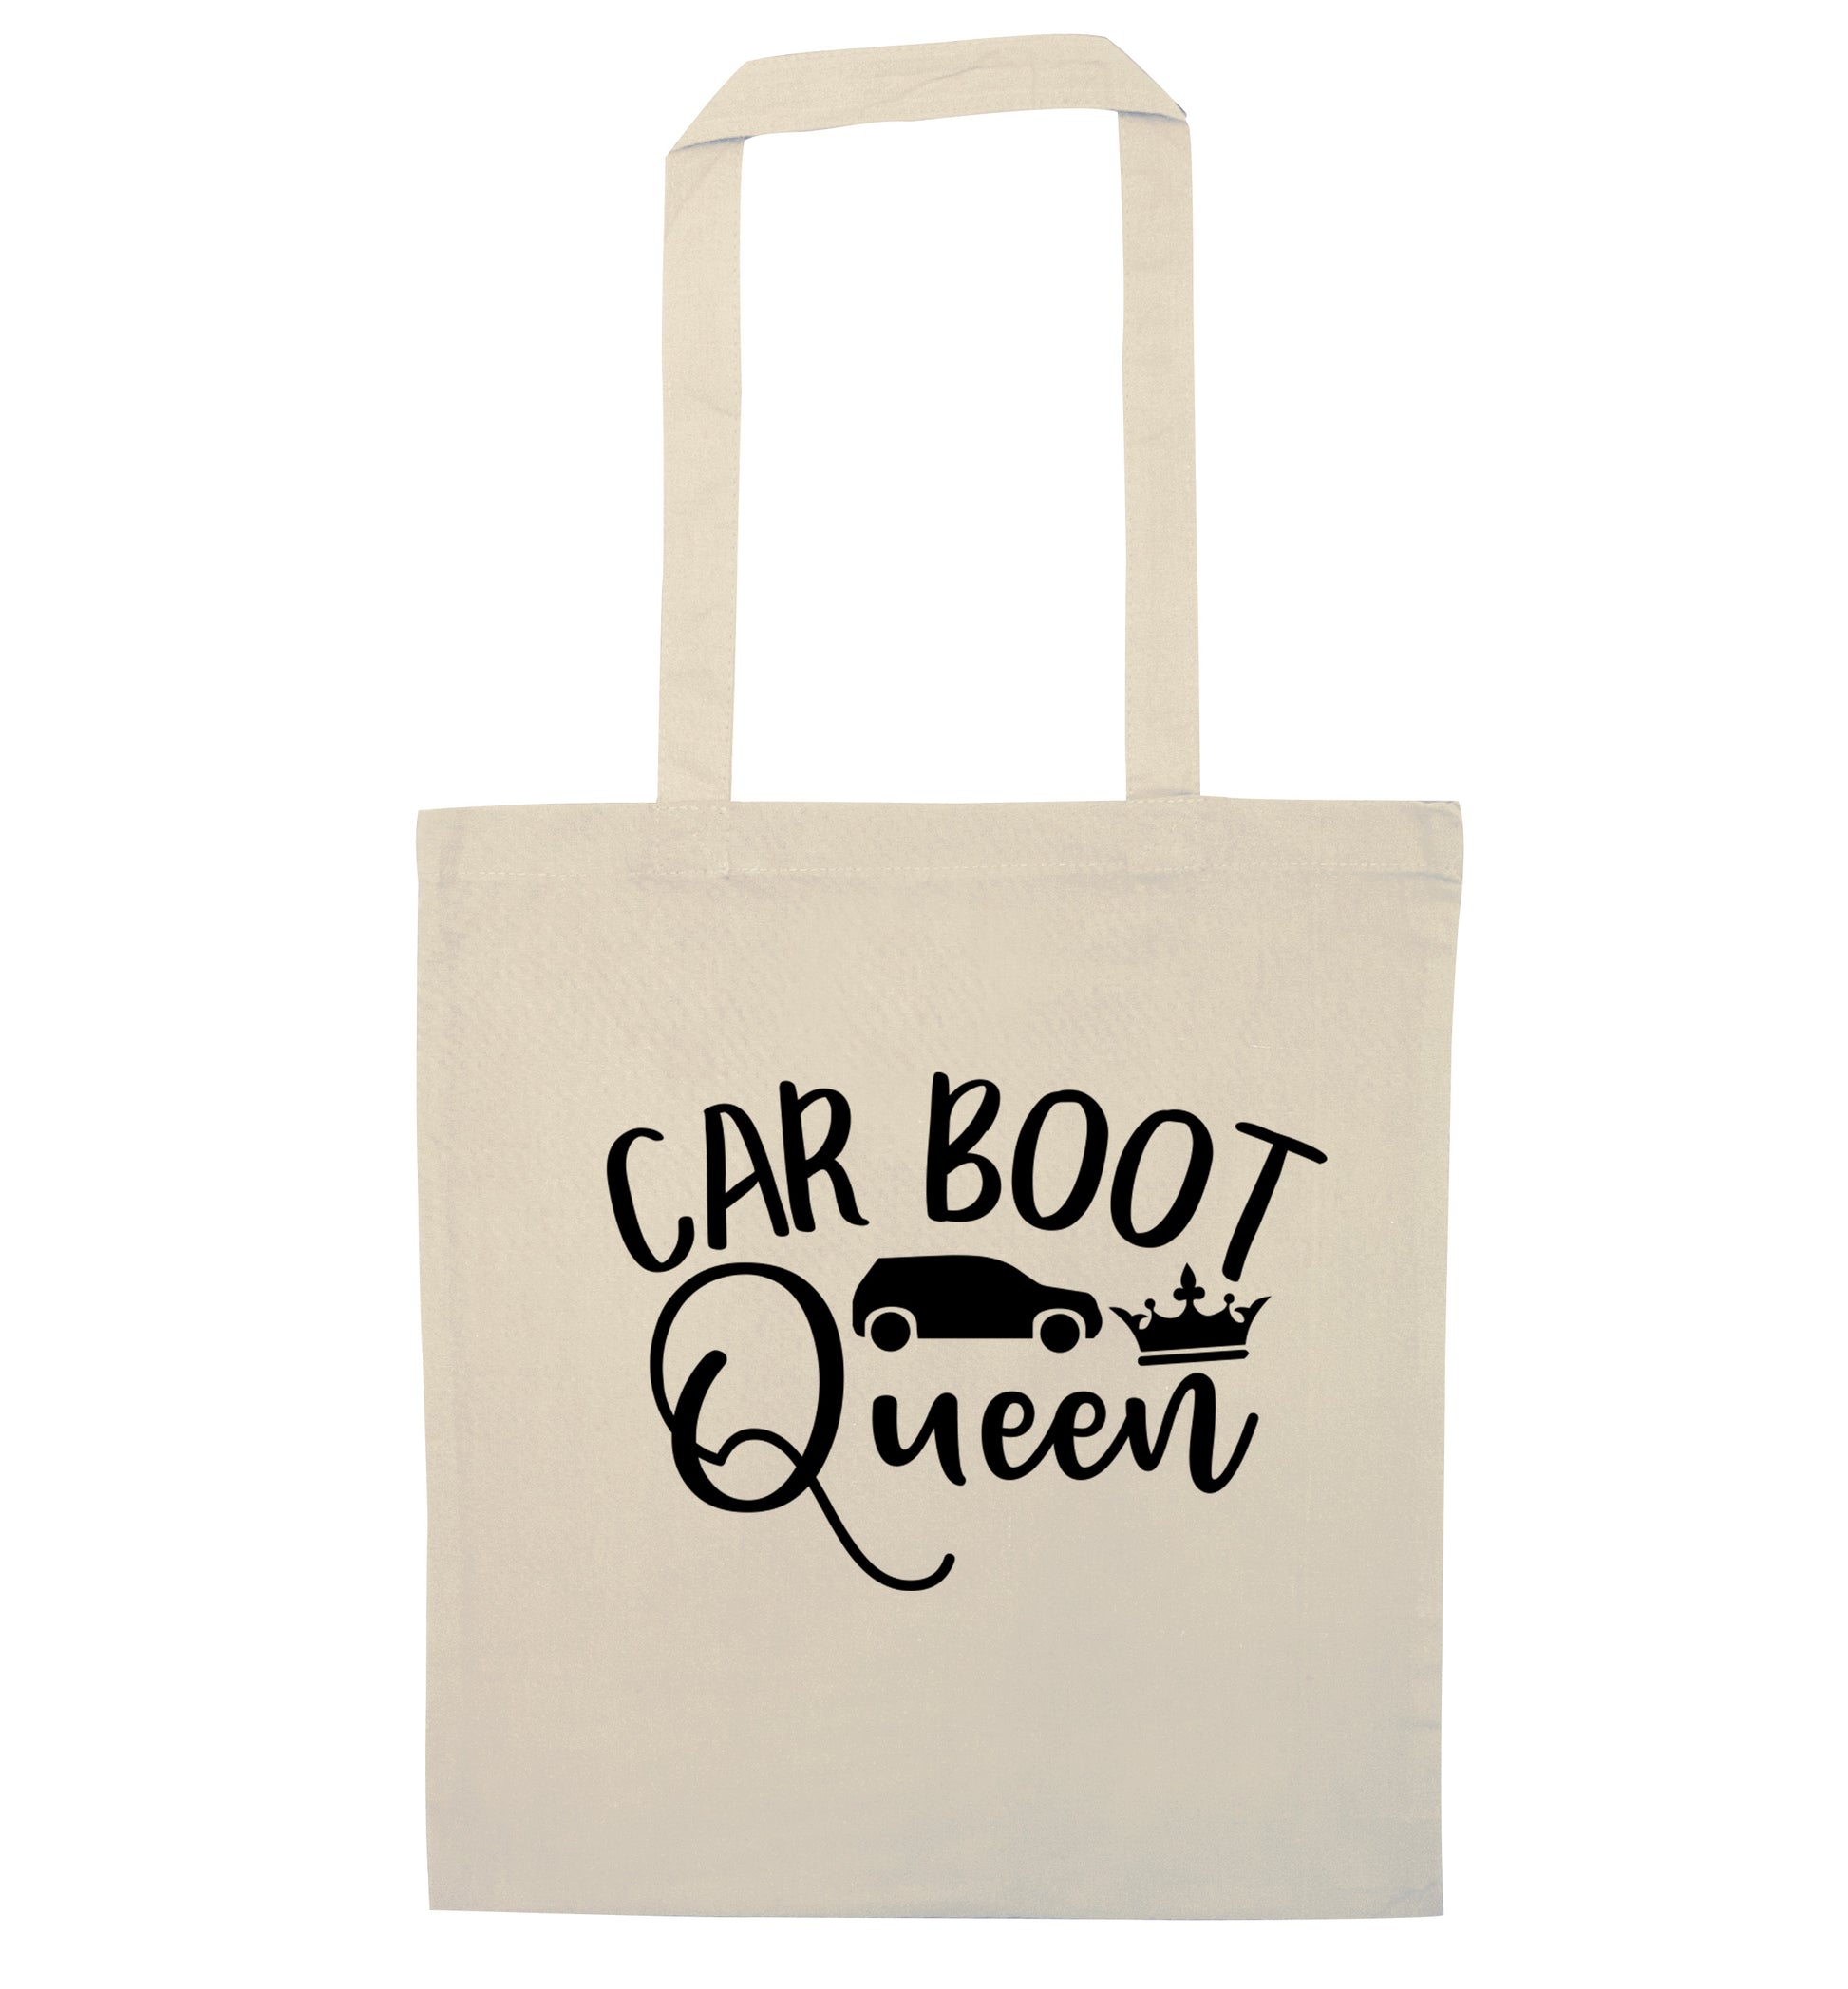 Carboot Queen natural tote bag